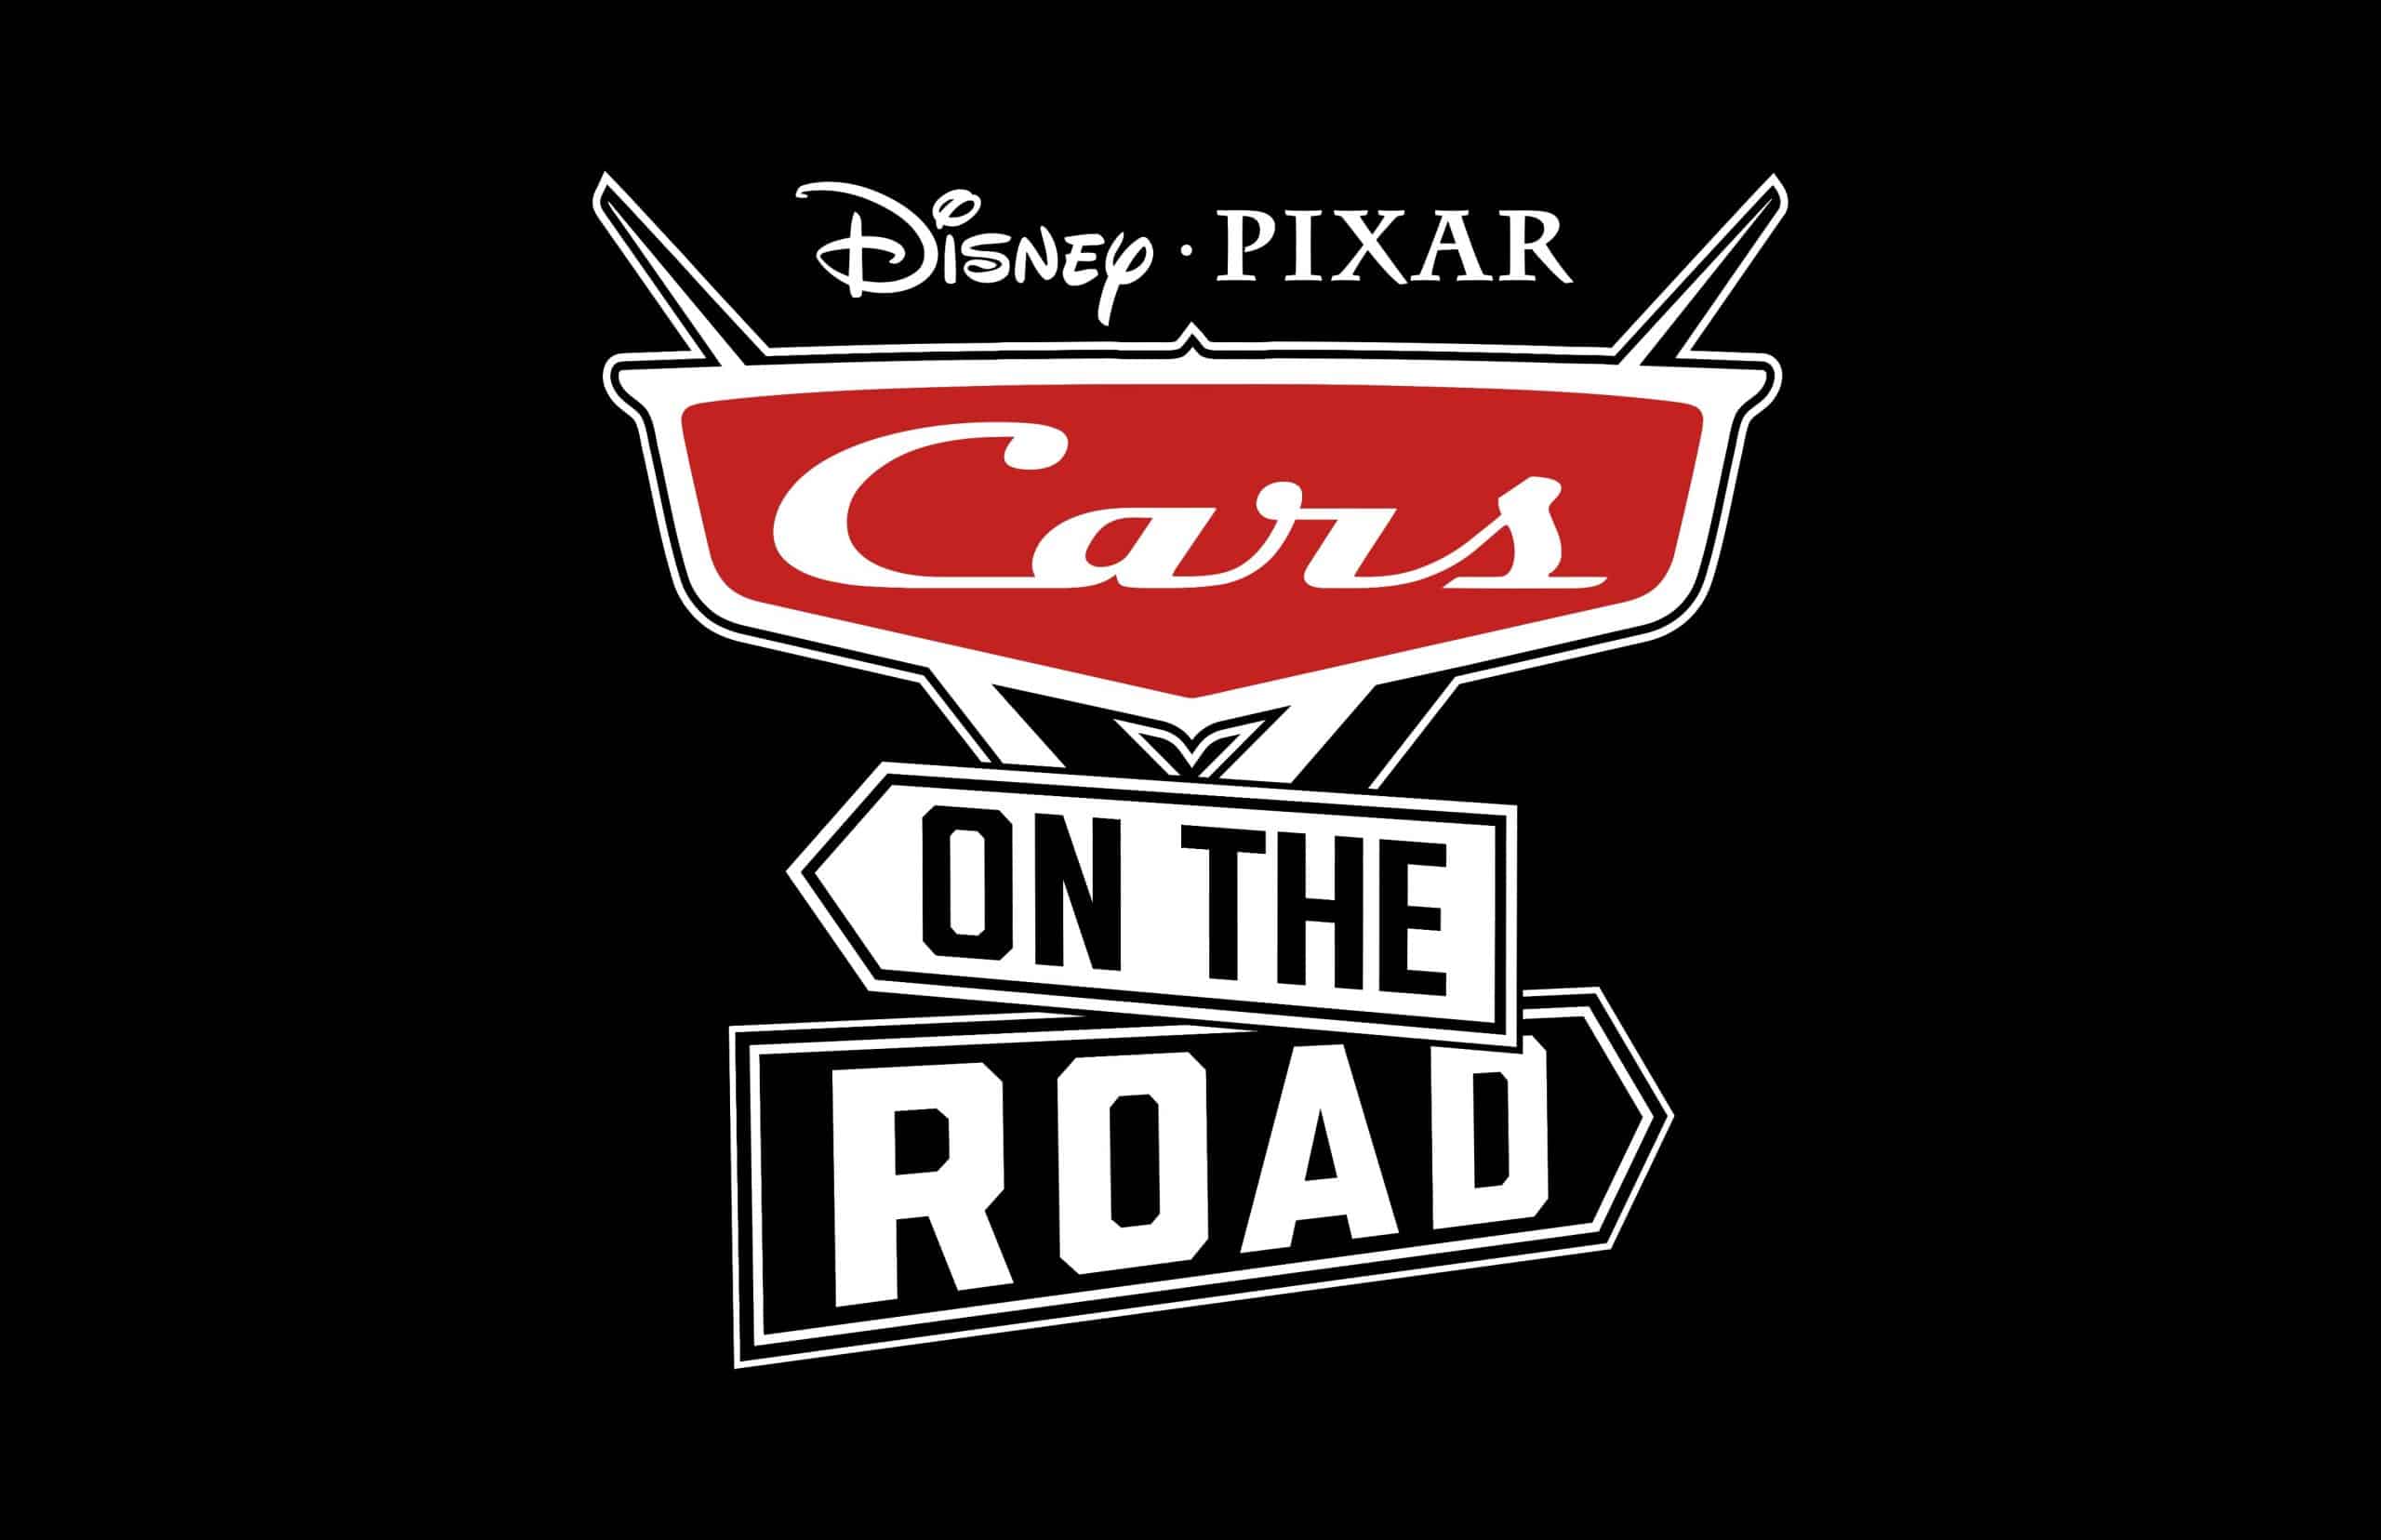 Pixar's “Cars On The Road” Is Coming Soon To Disney+ – What's On Disney Plus